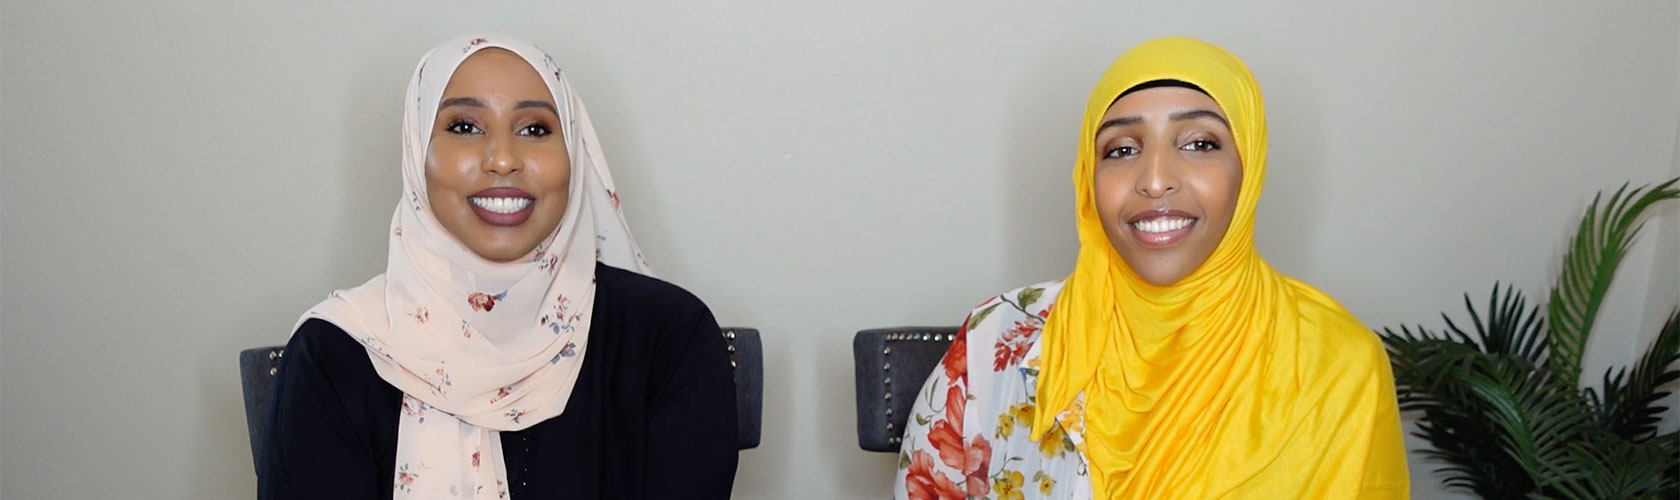 Circle Time Magazine Somali Edition hosts, Maryam Diriye and Samira Noor, sitting in brown chairs looking at the screen.